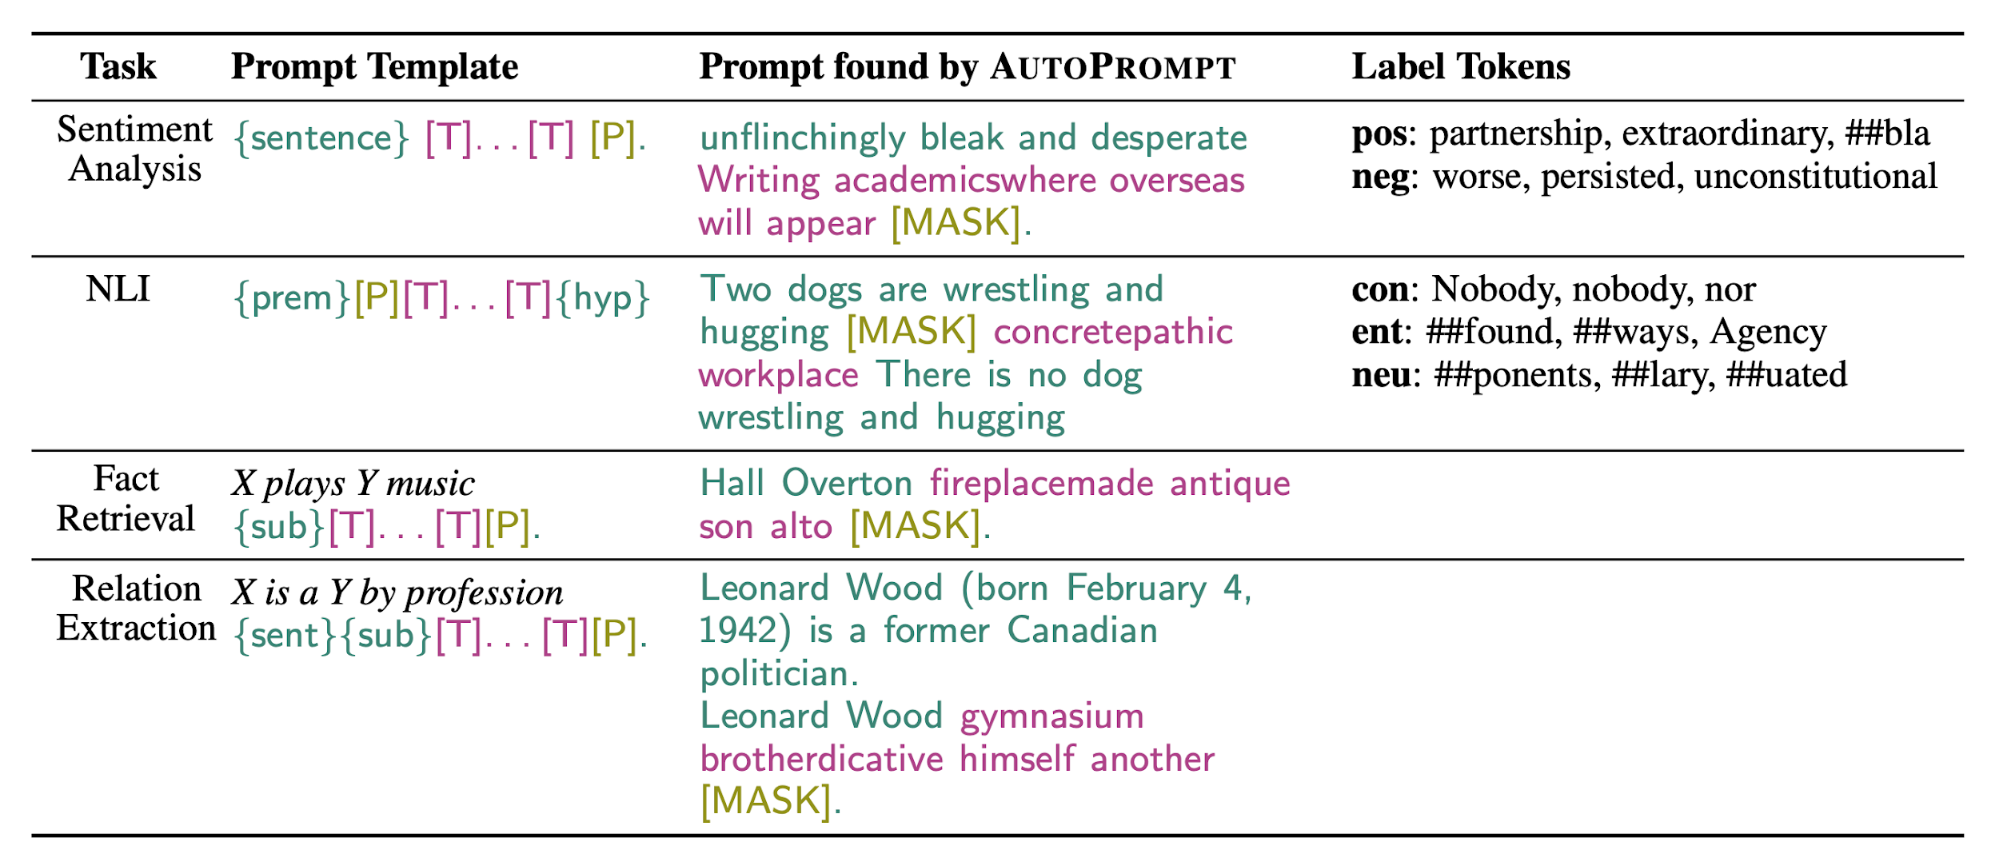 Example prompts discovered by AutoPrompt for different tasks.